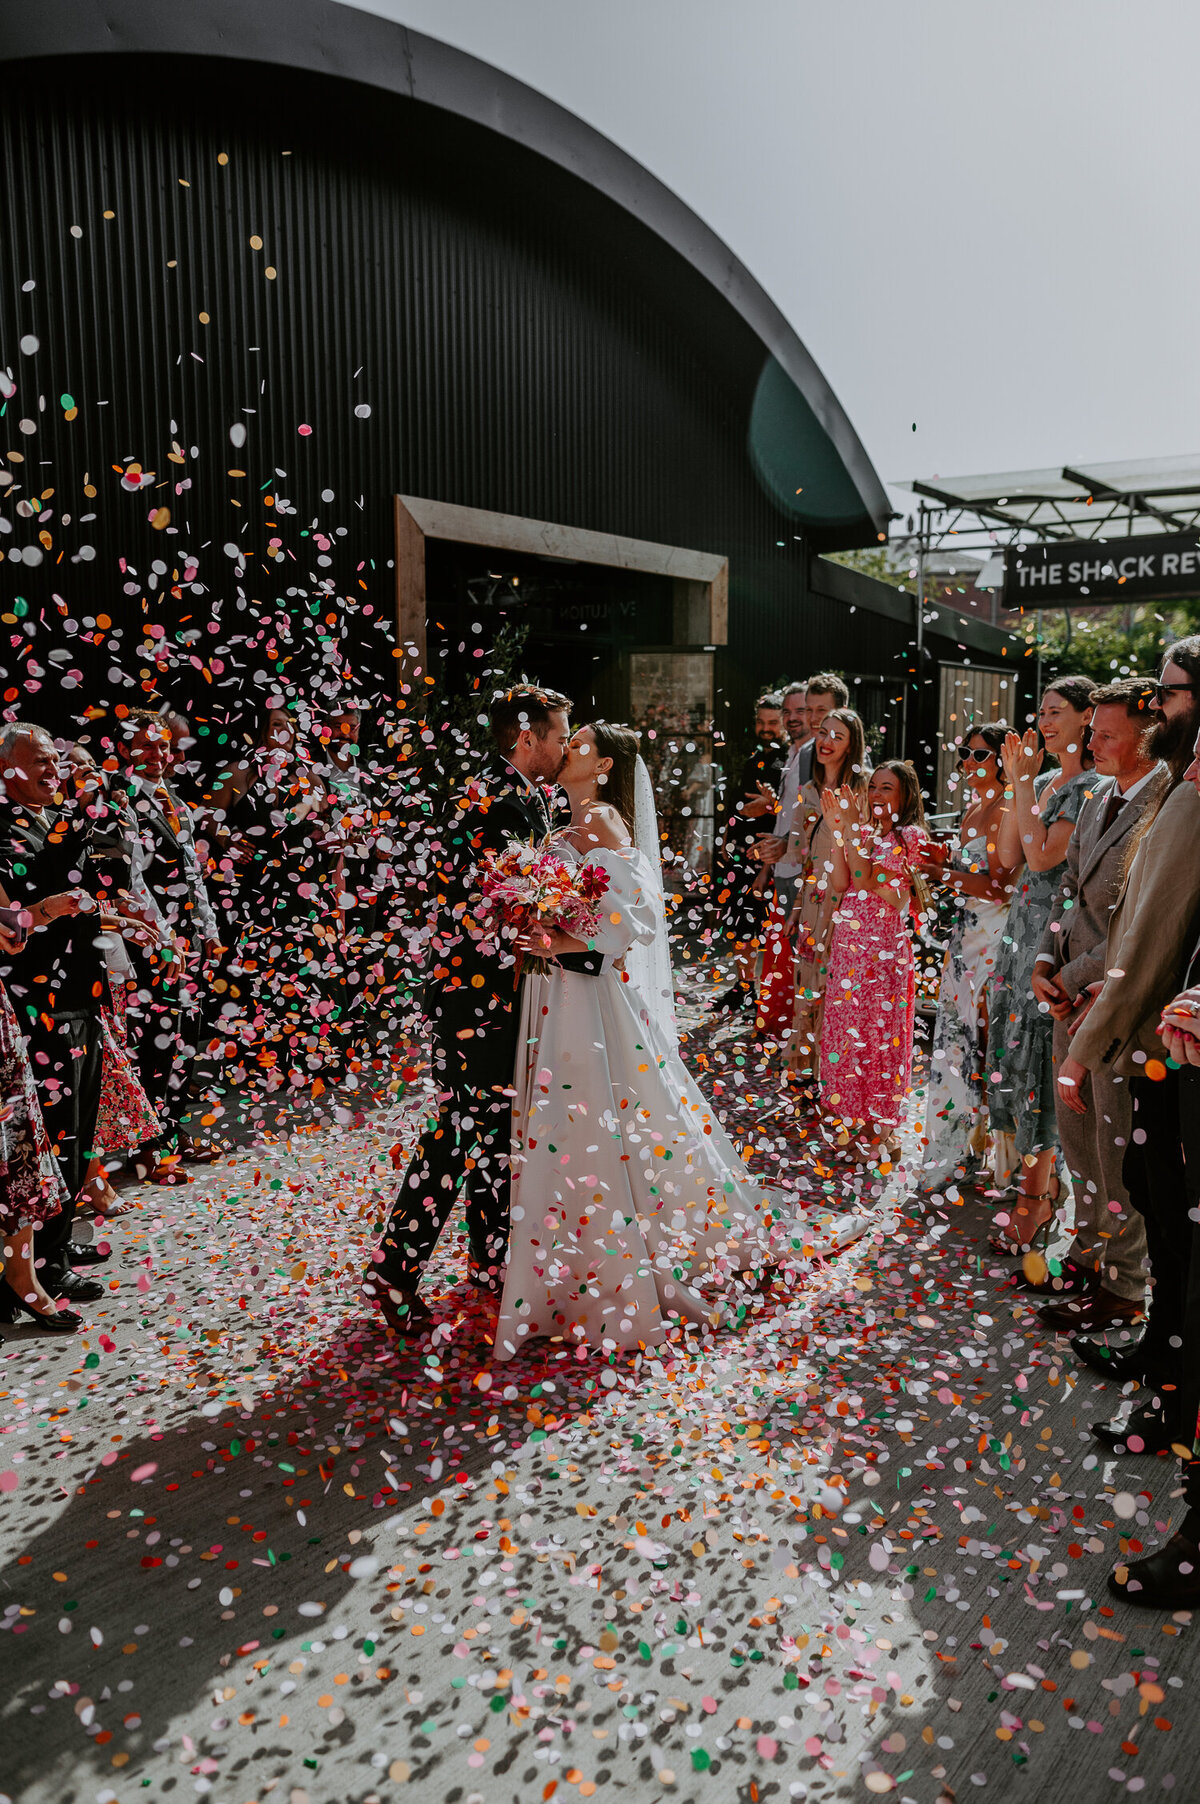 Guests throw confetti over a ride and groom outside the Shack Revolution in Hereford.